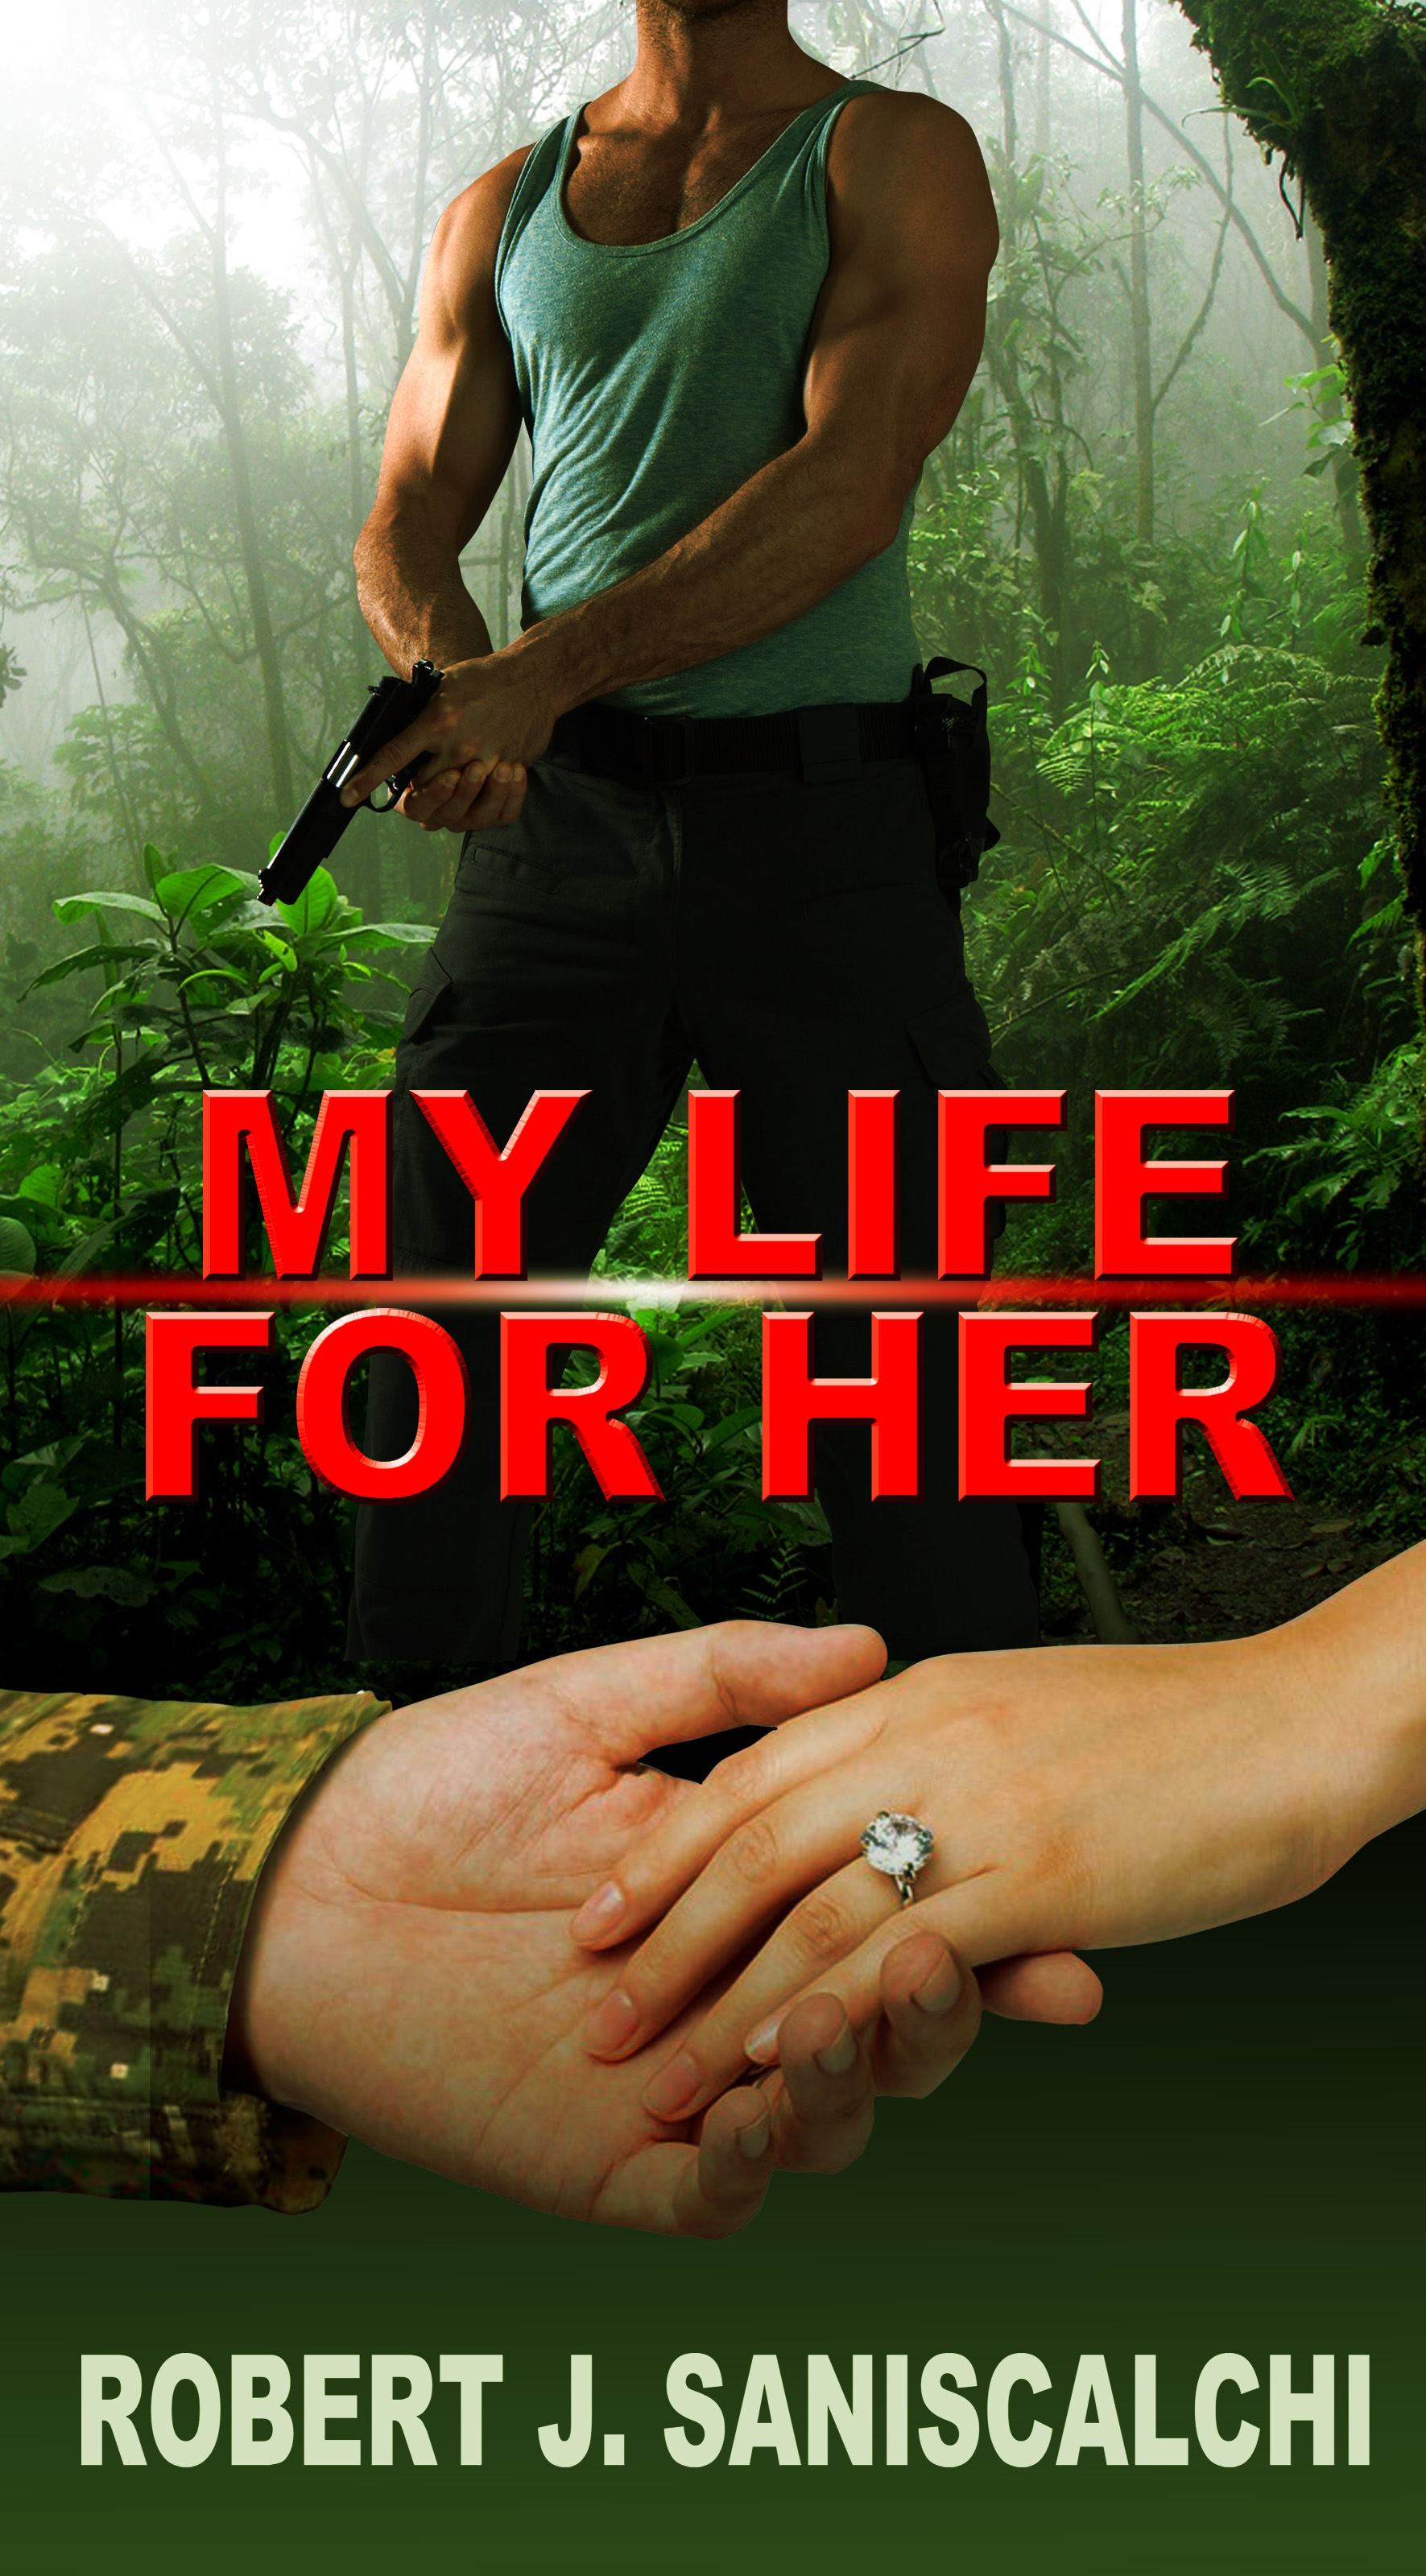 My Life For Her by Robert J. Saniscalchi